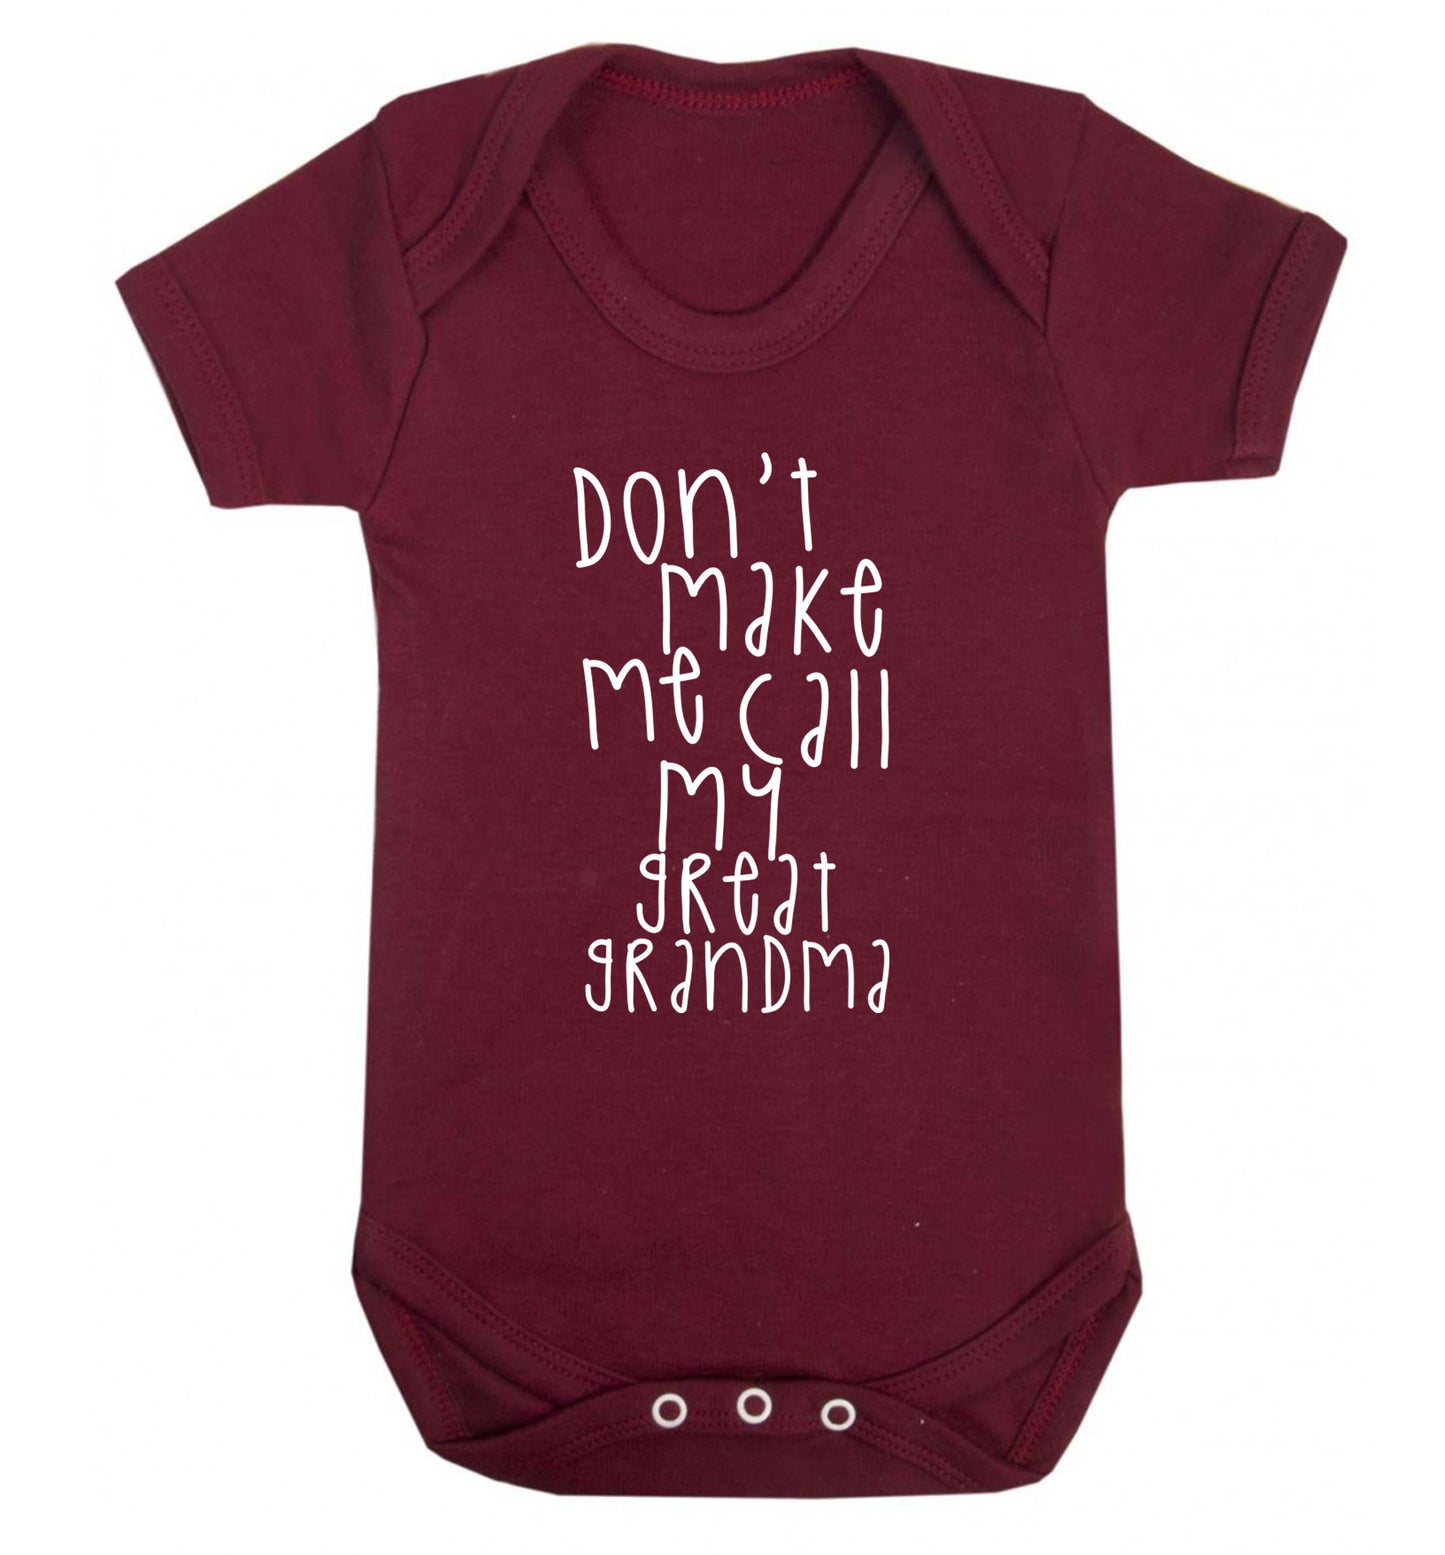 Don't make me call my great grandma Baby Vest maroon 18-24 months